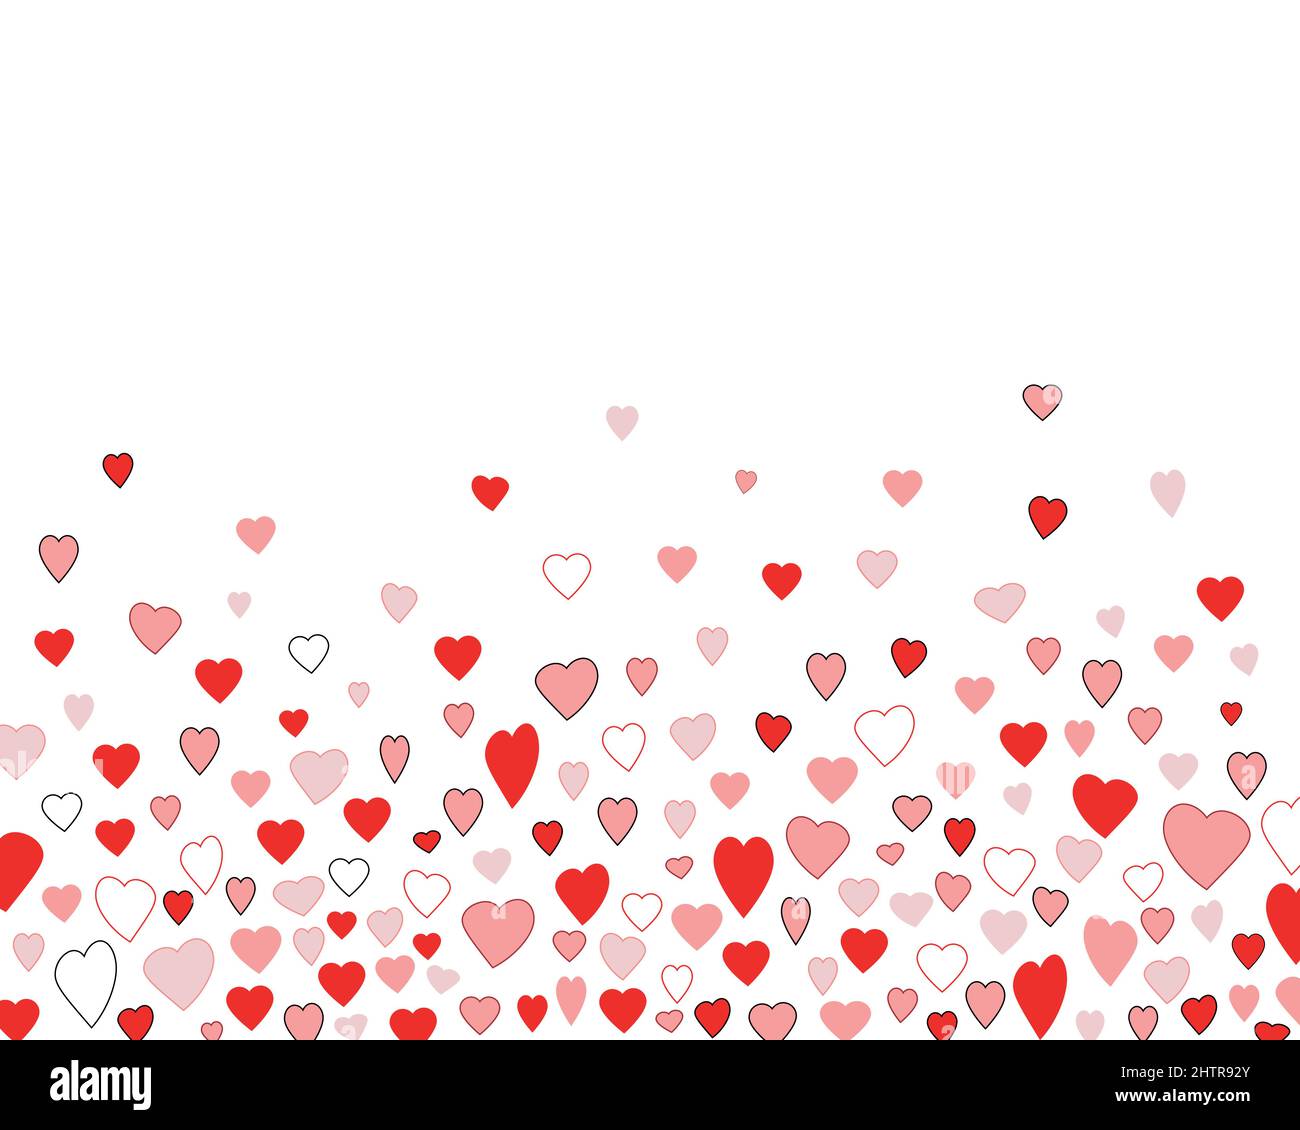 Heart icons on a white background Stock Vector